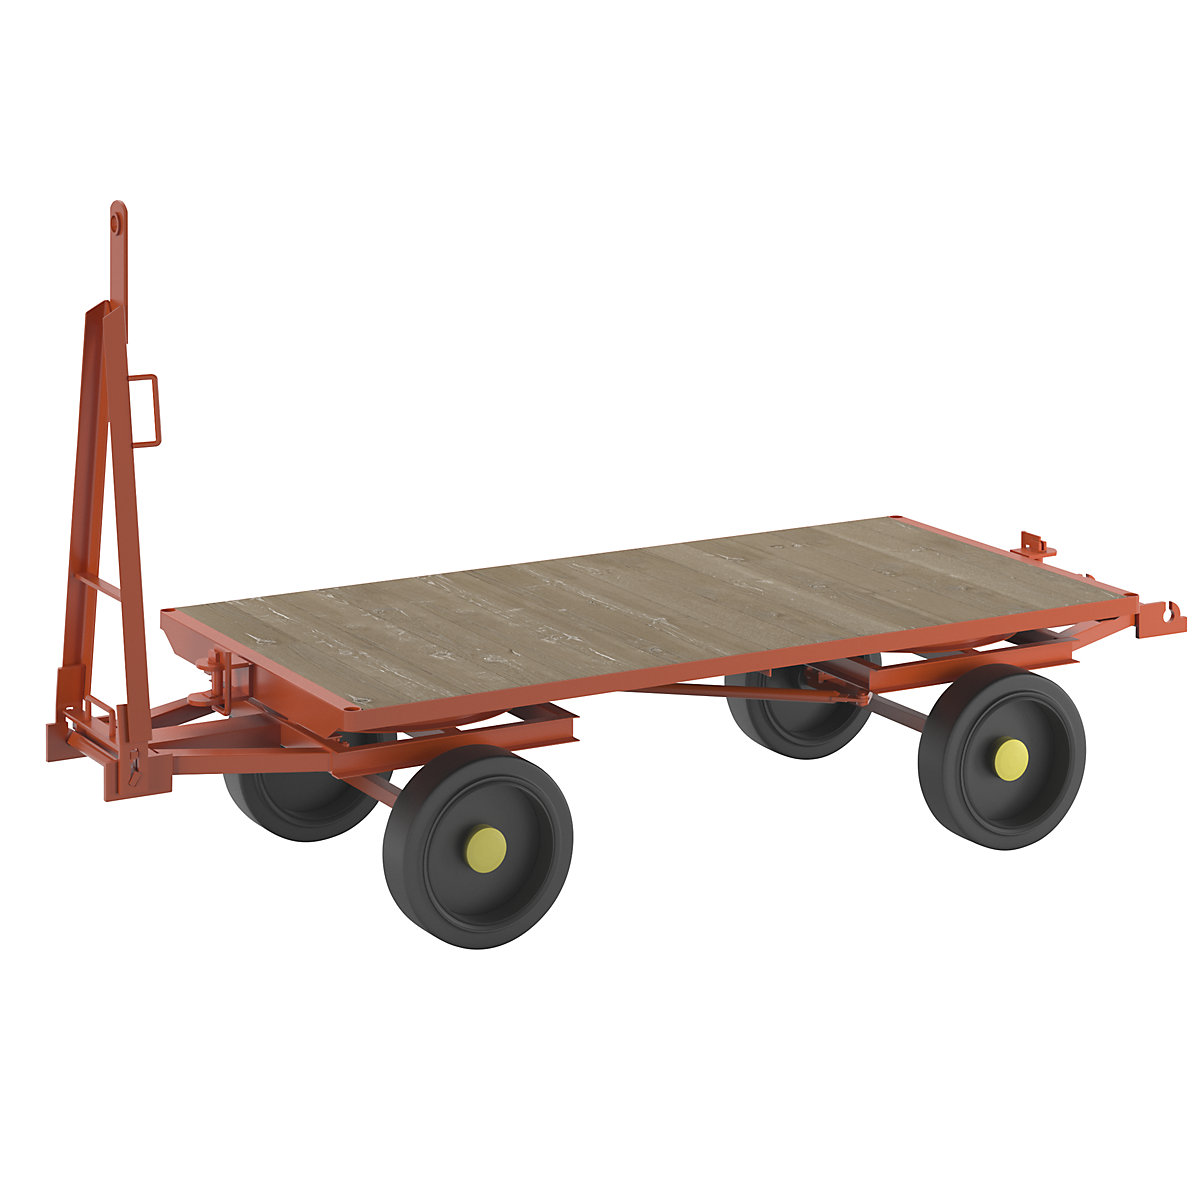 Trailer, 4-wheel double turntable steering, max. load 5 t, platform 2.0 x 1.0 m, solid rubber tyres-5